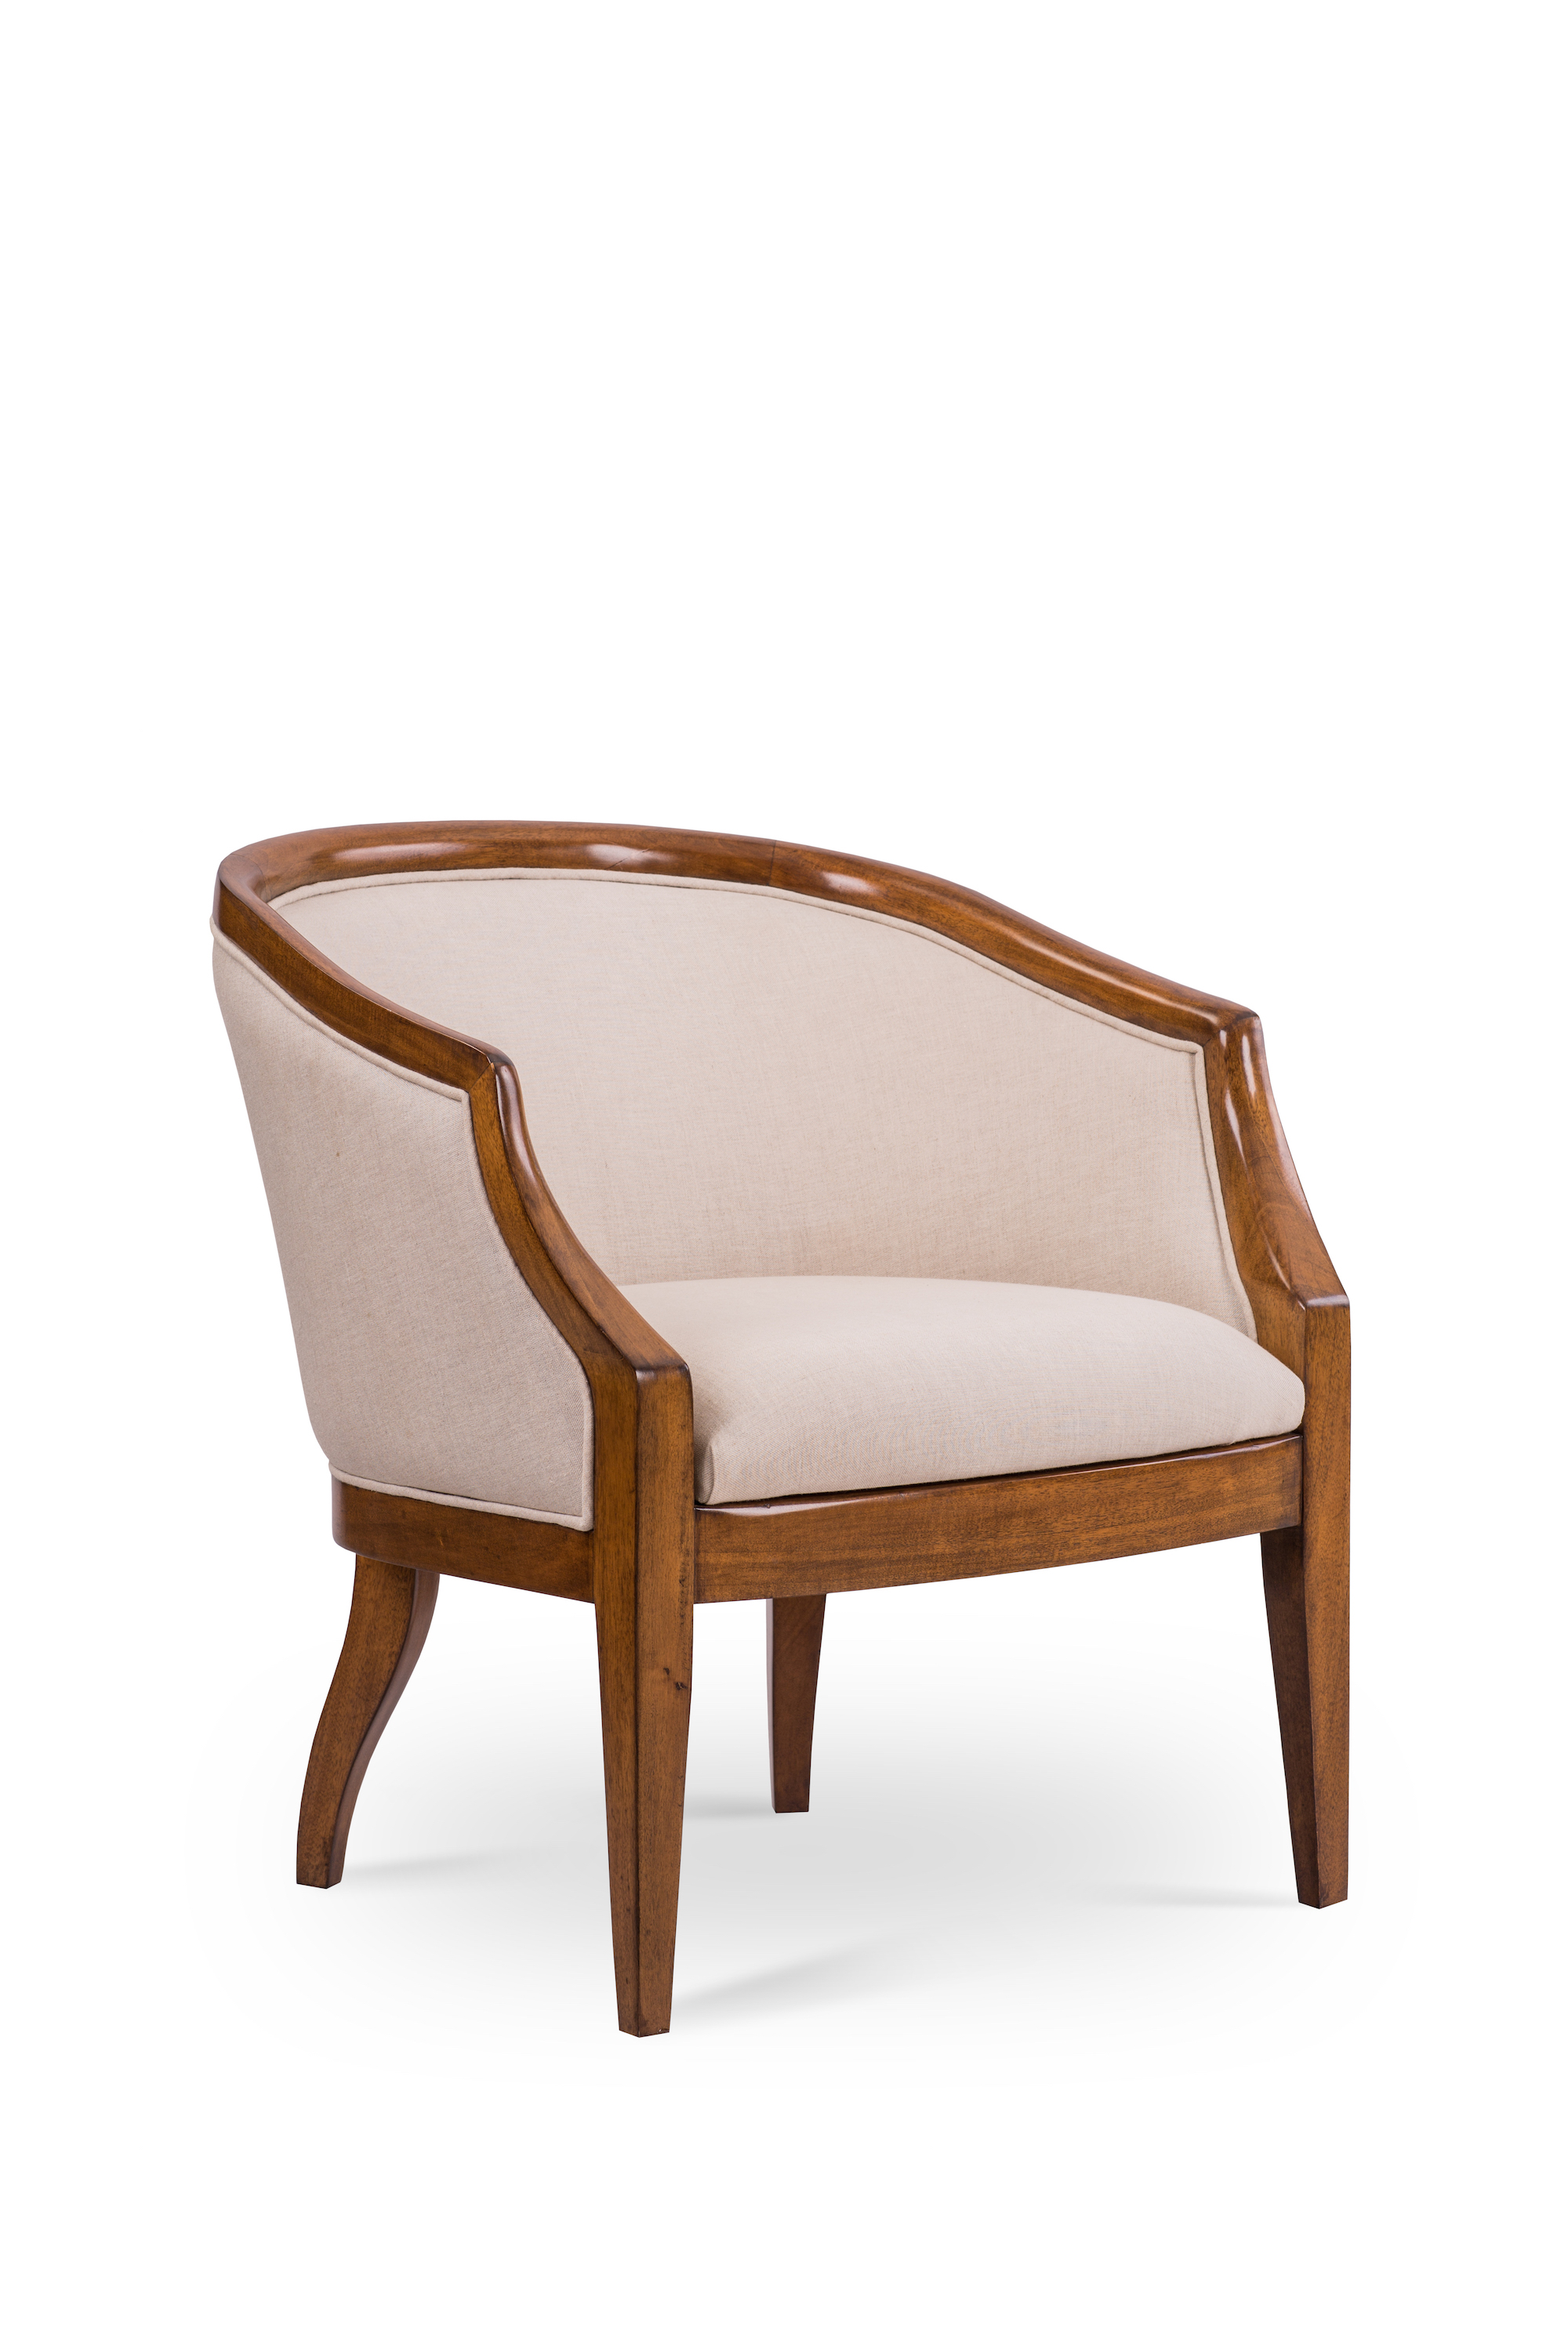 Claire Barrel Chair in Honey Finish